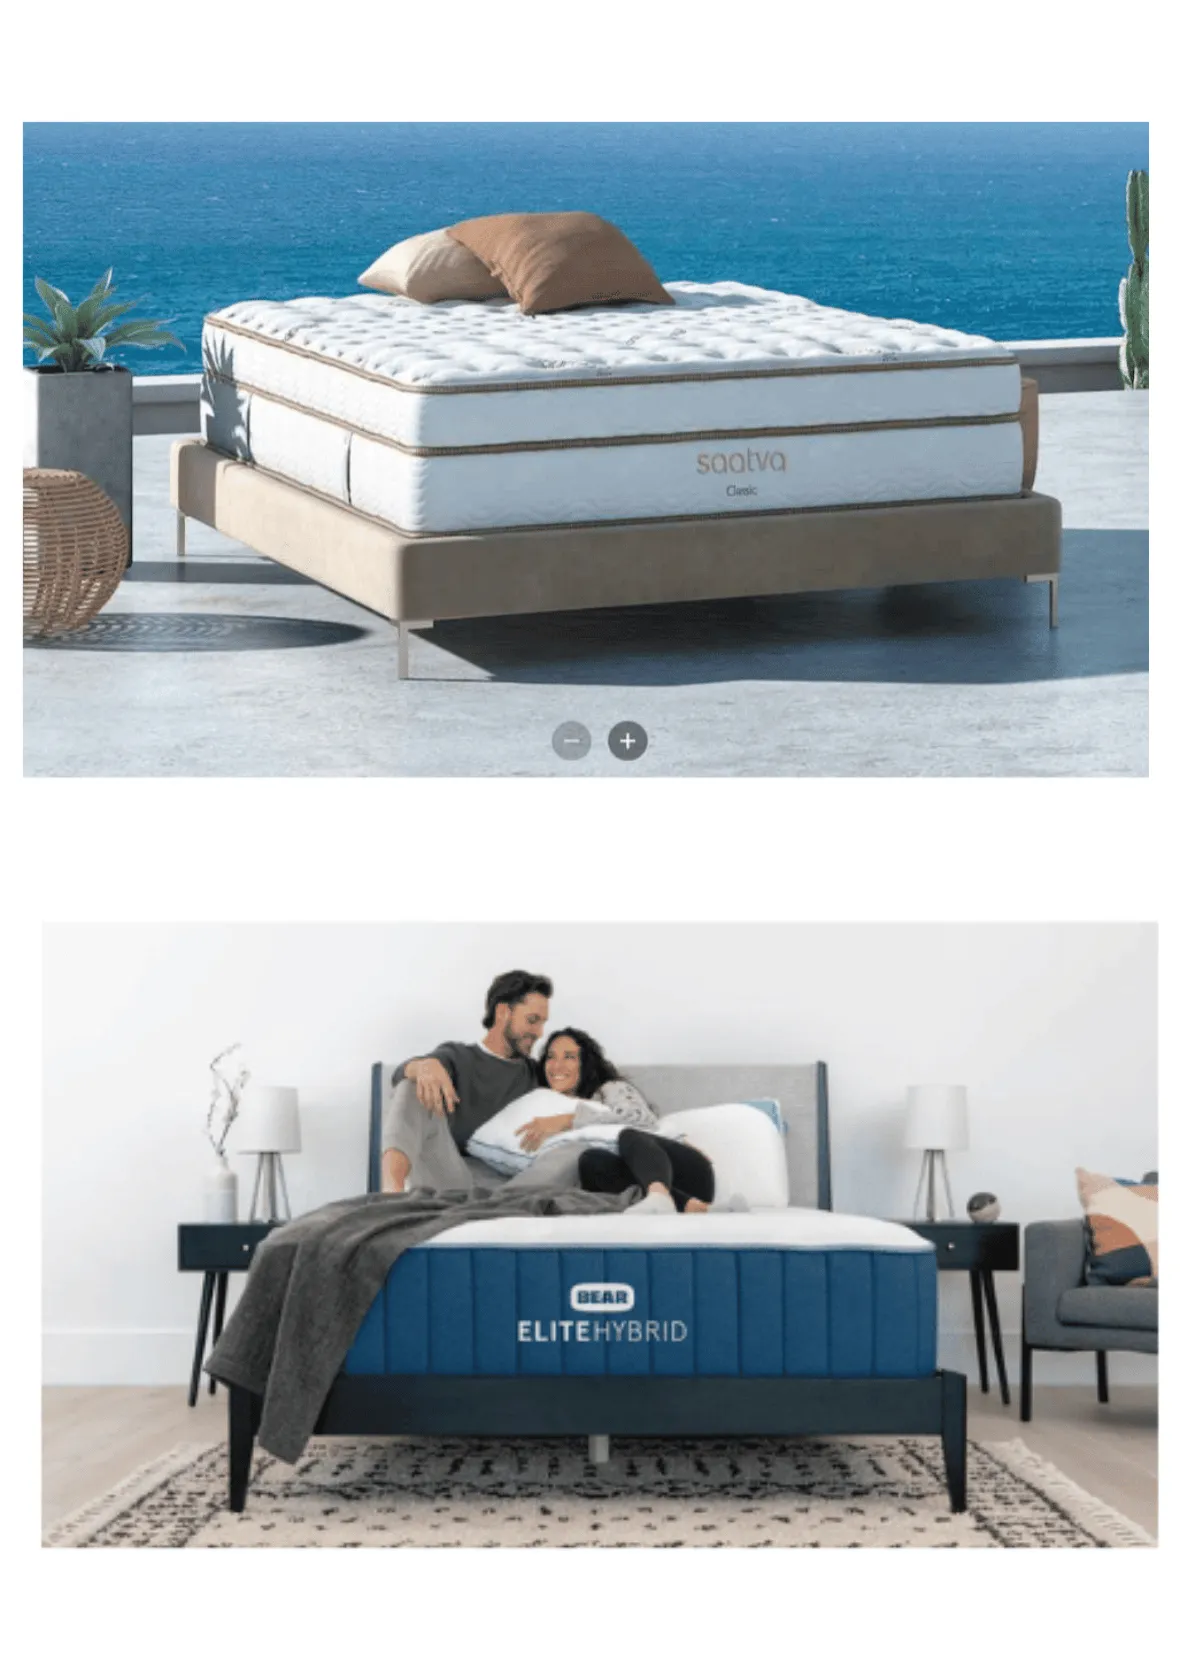 "Best Mattress For Heavy People: Top Picks and Buying Guide”